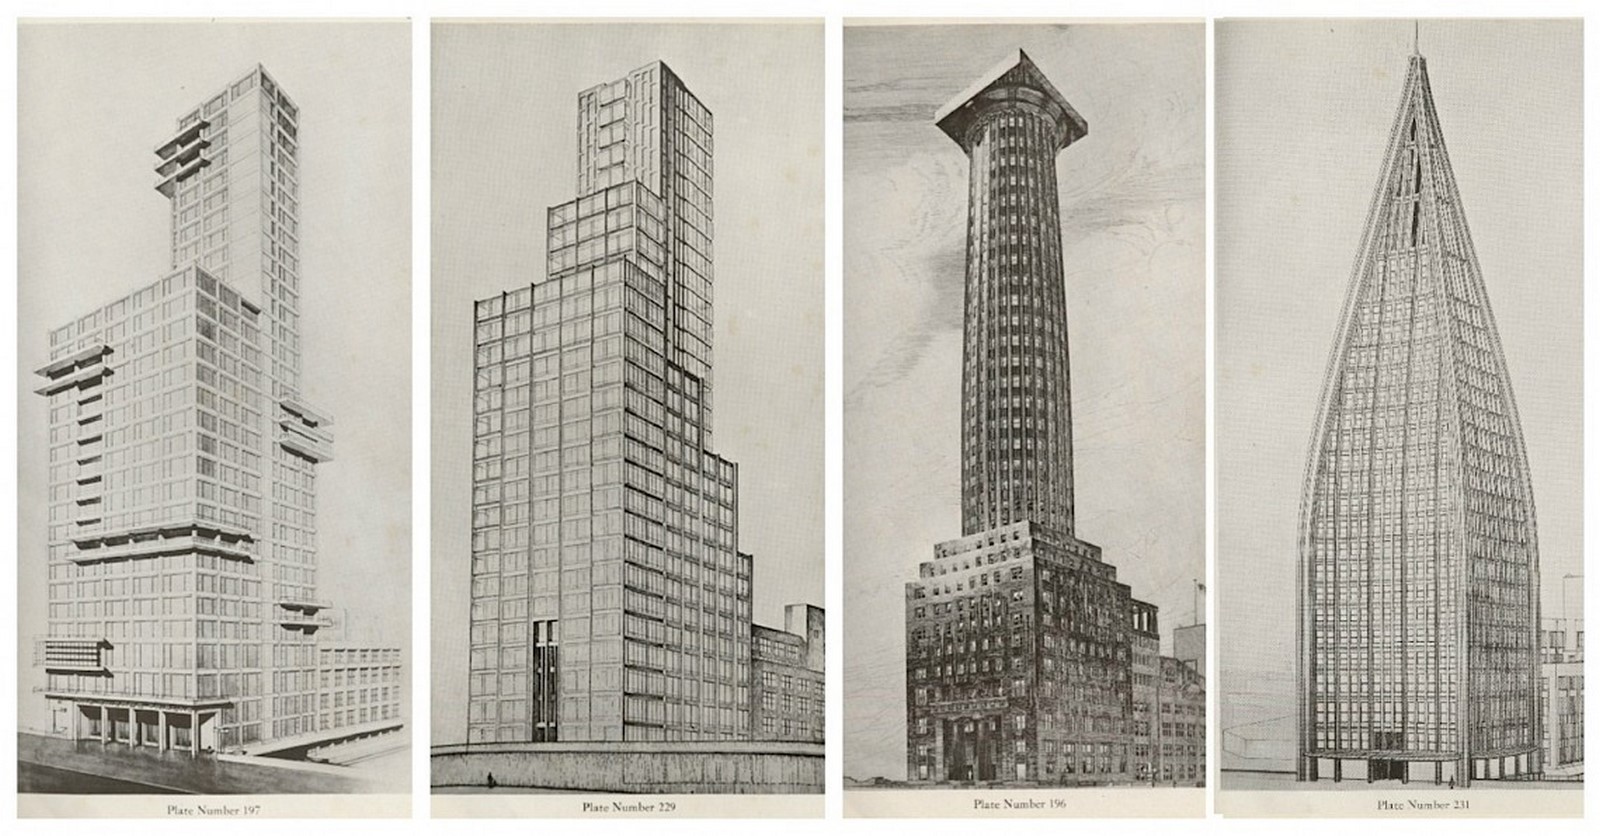 10 things you did not know about Adolf Loos - Sheet3